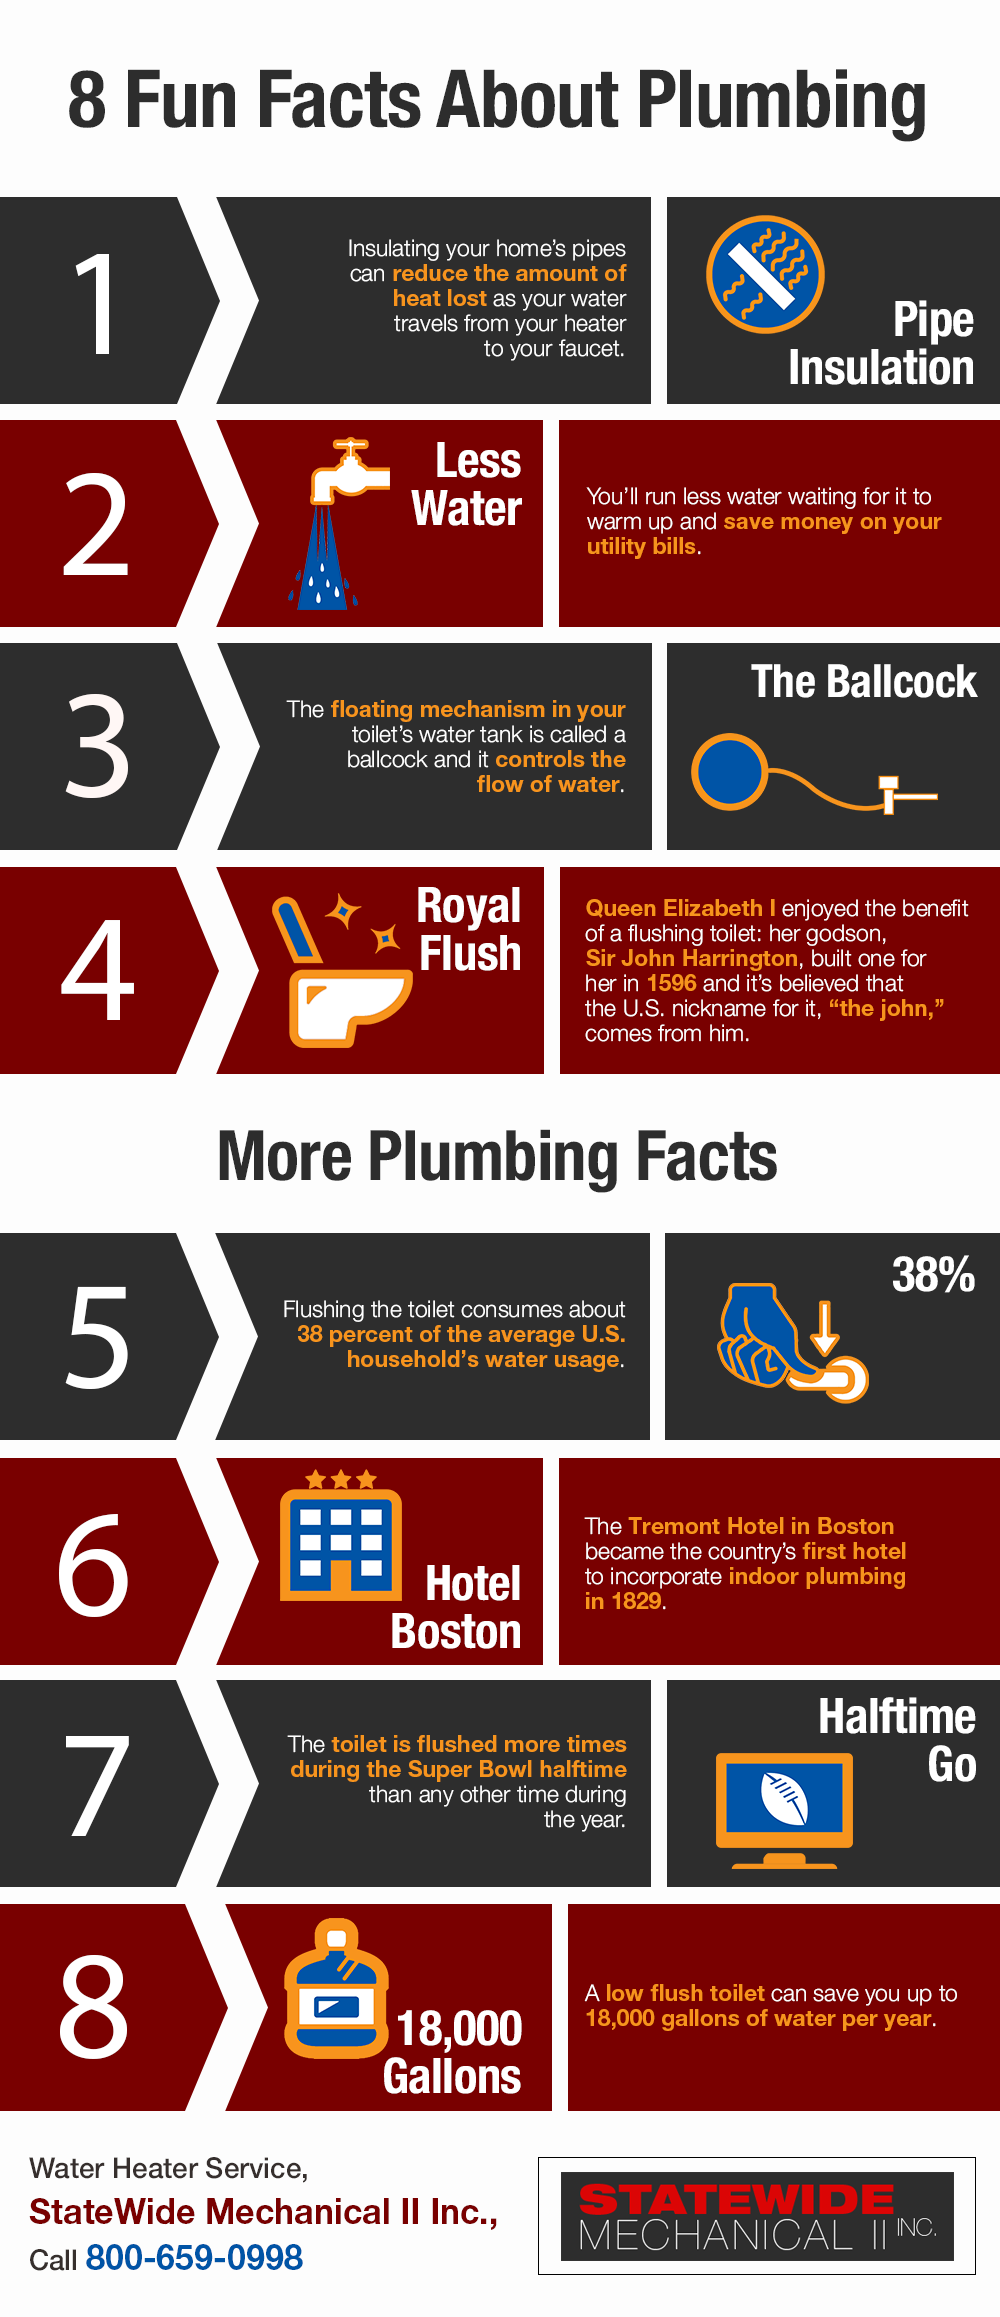 8 Fun Facts About Plumbing Shared Info Graphics